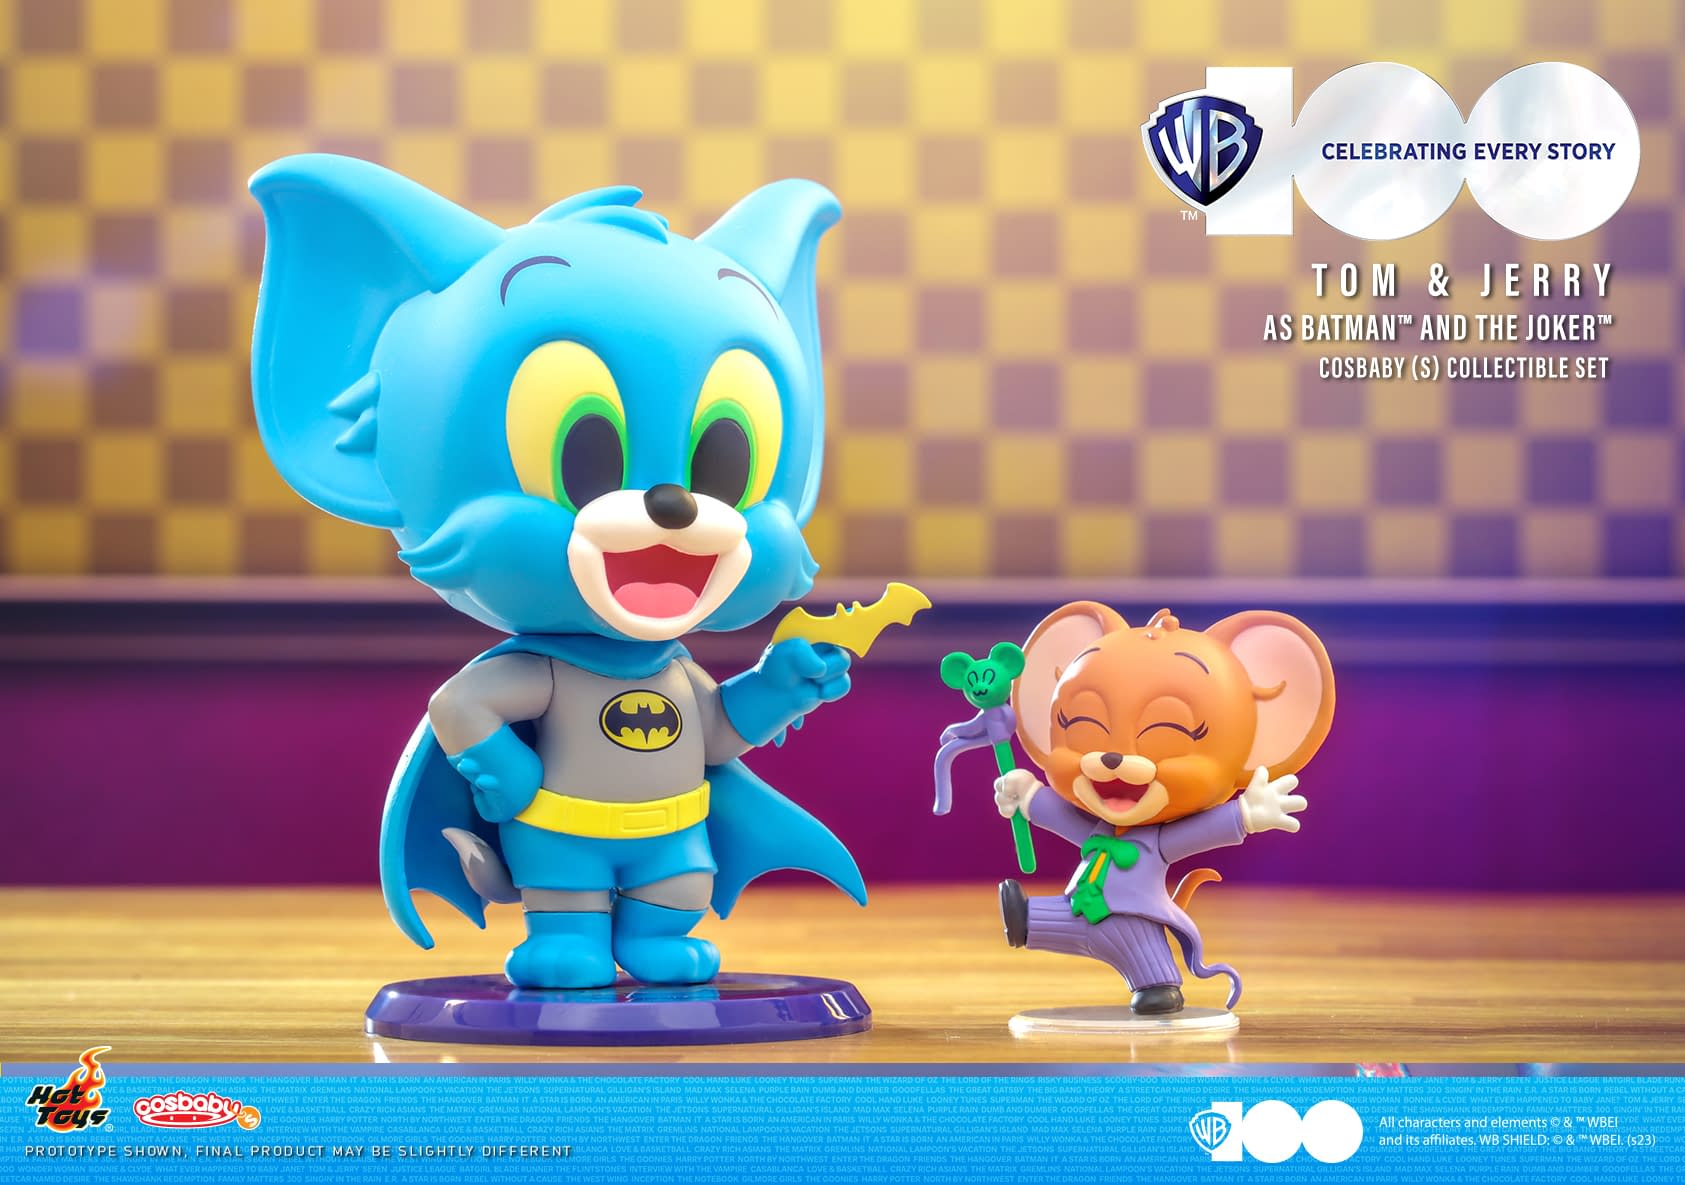 Hot Toys Celebrates Wb100 With Some Fun Tom & Jerry Crossovers